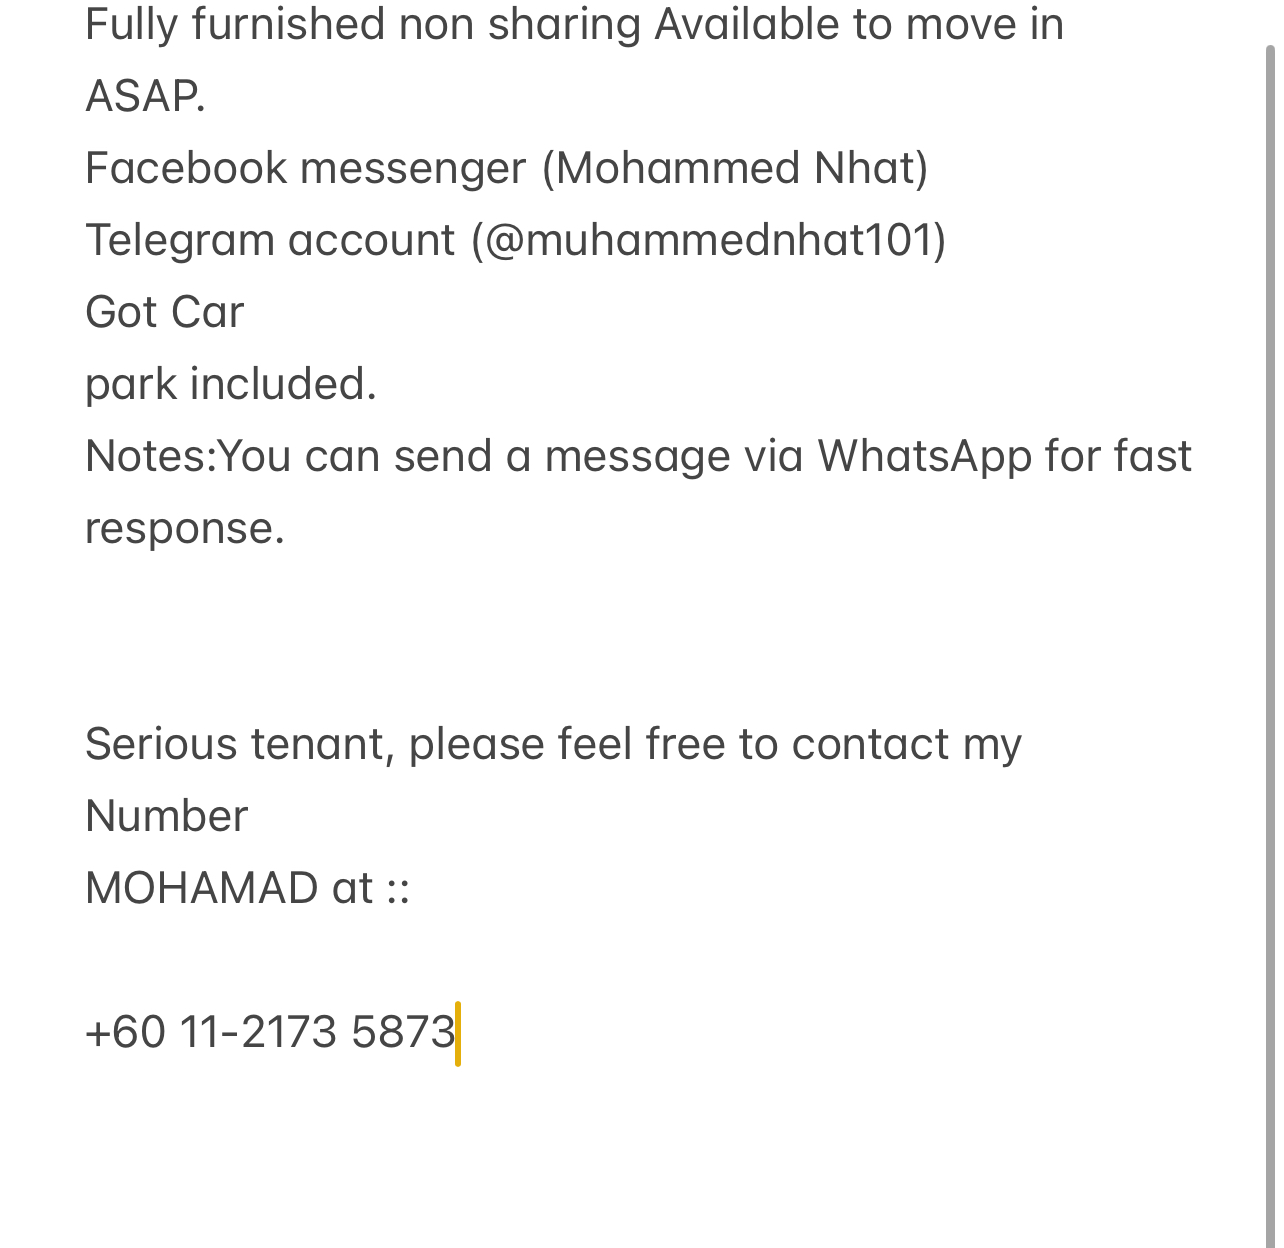 room for rent, master room, kanowit, Send the owner a message on WhatsApp/facebook if you want to RENT the unit facebook (Mohammed Nhat)&Telegram(@muhammednhat101) Fully furnished non sharing :(comfortable)